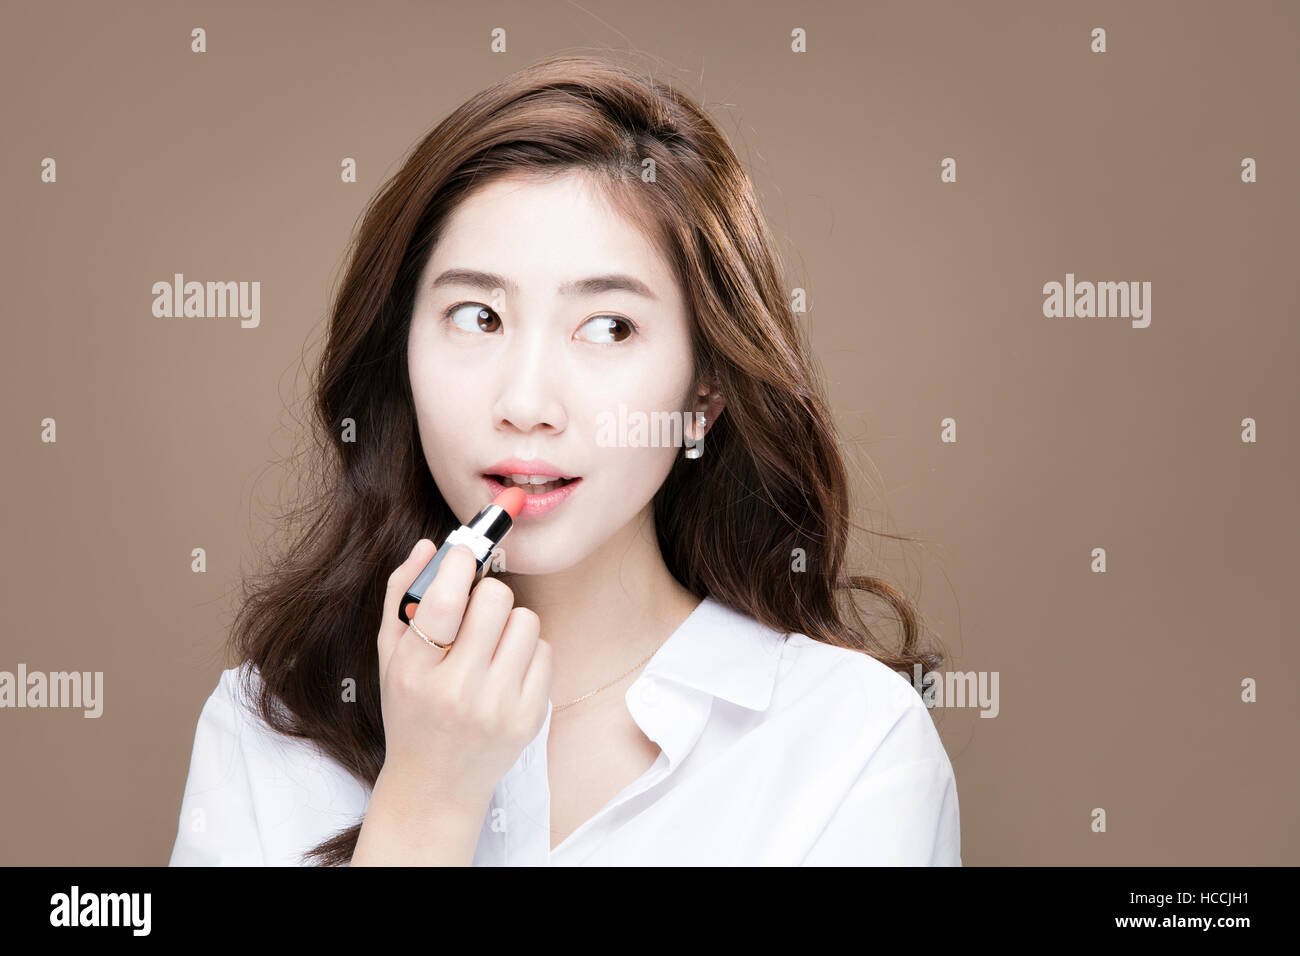 Portrait of young woman putting on lipstick Stock Photo